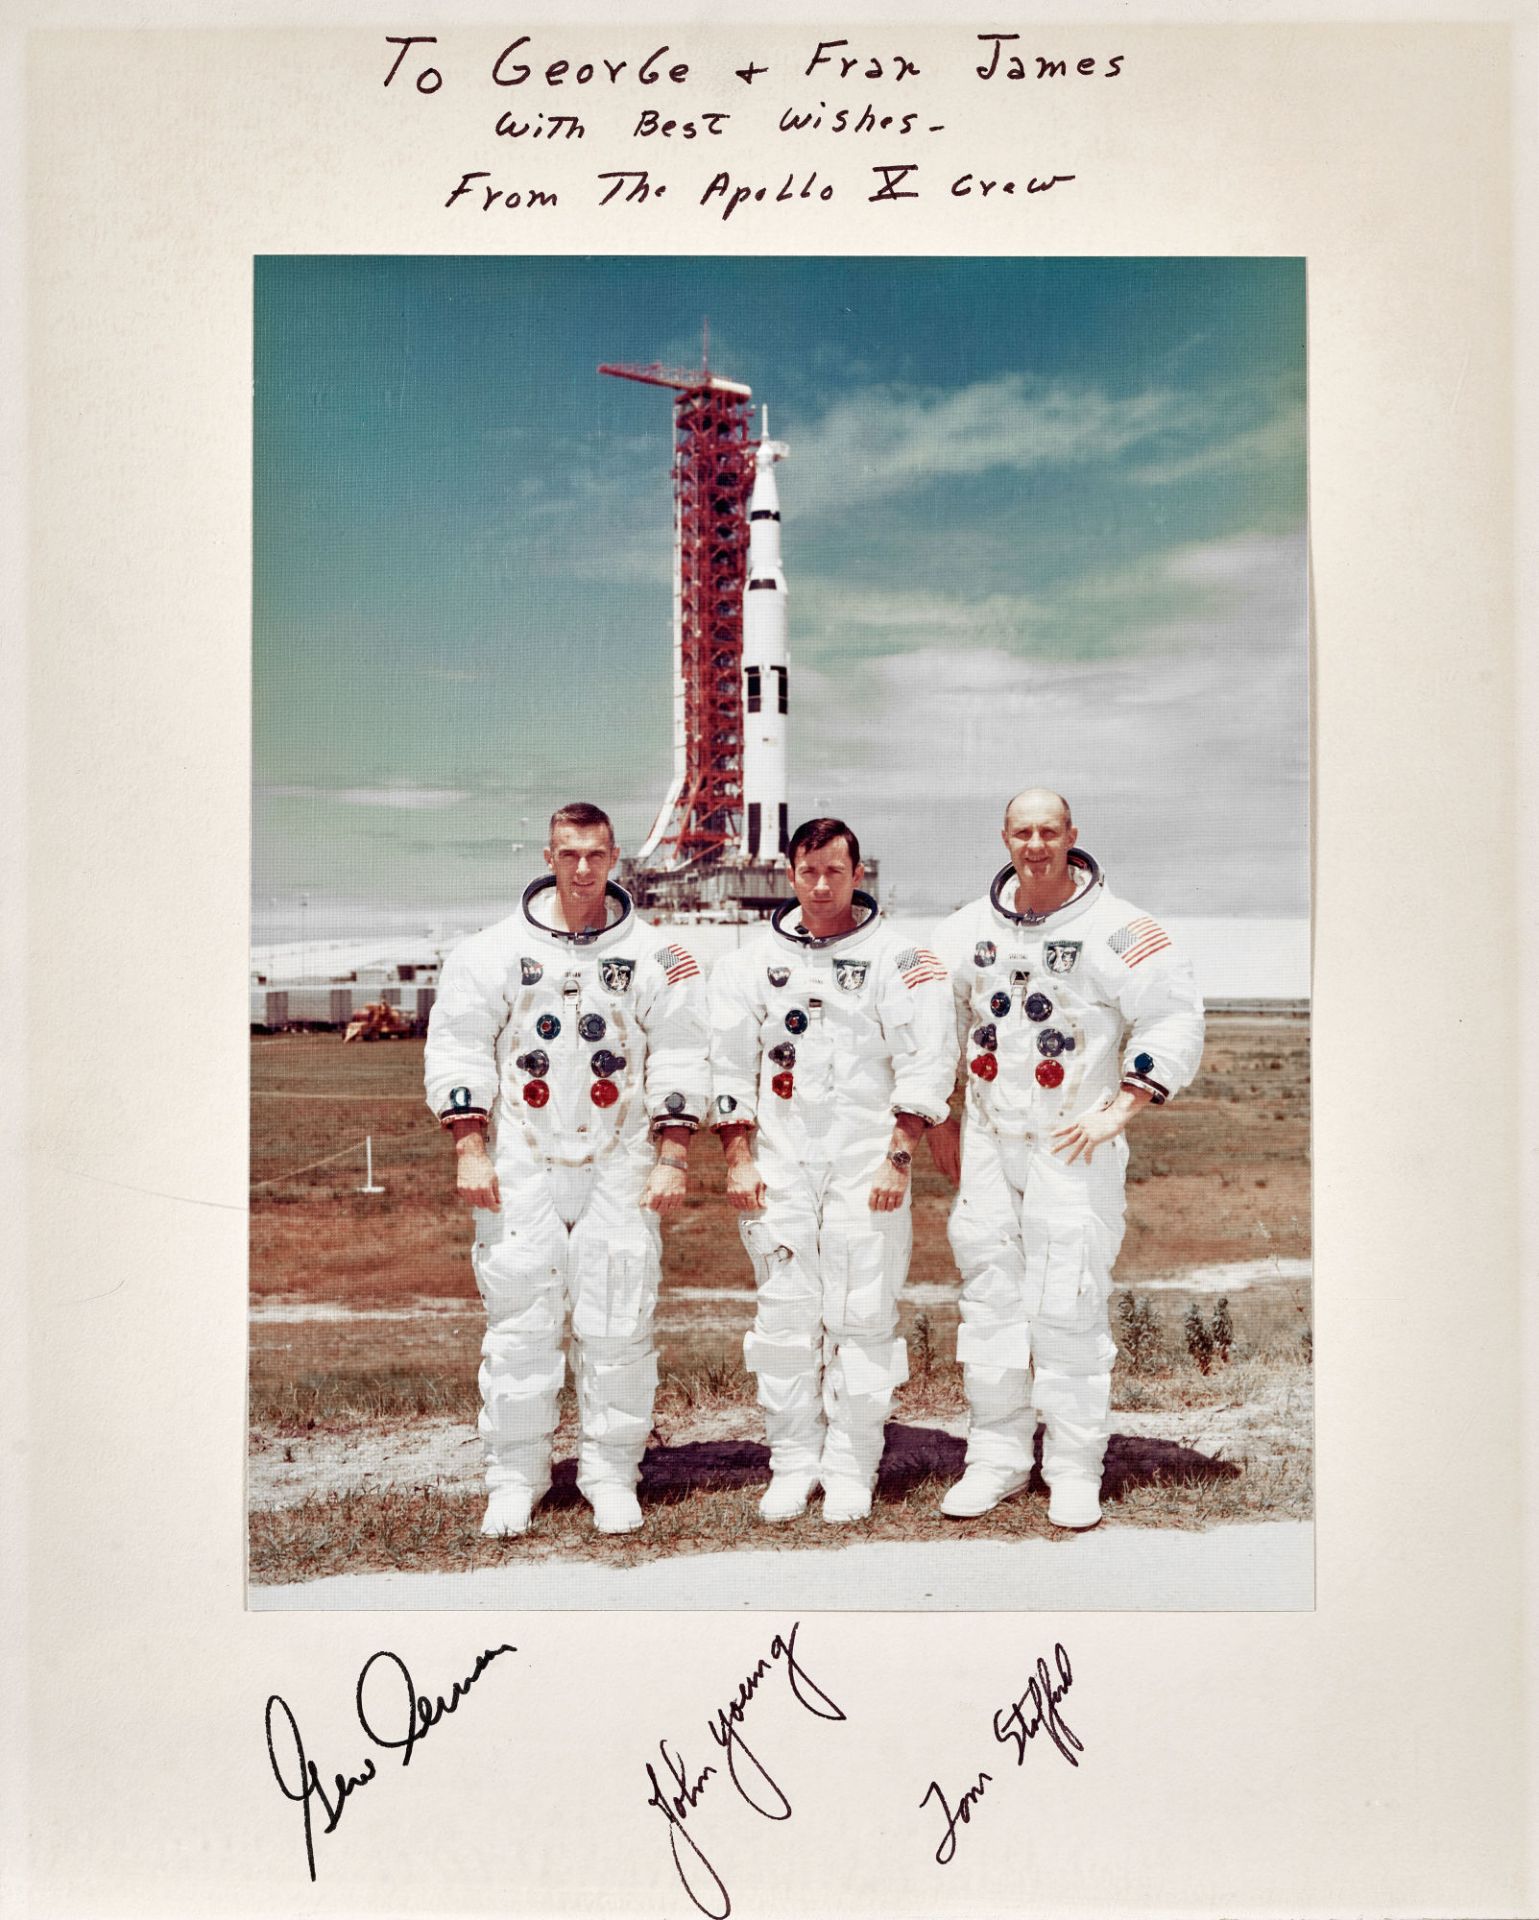 ANONYM: "Best wishes from the Apollo X Crew".